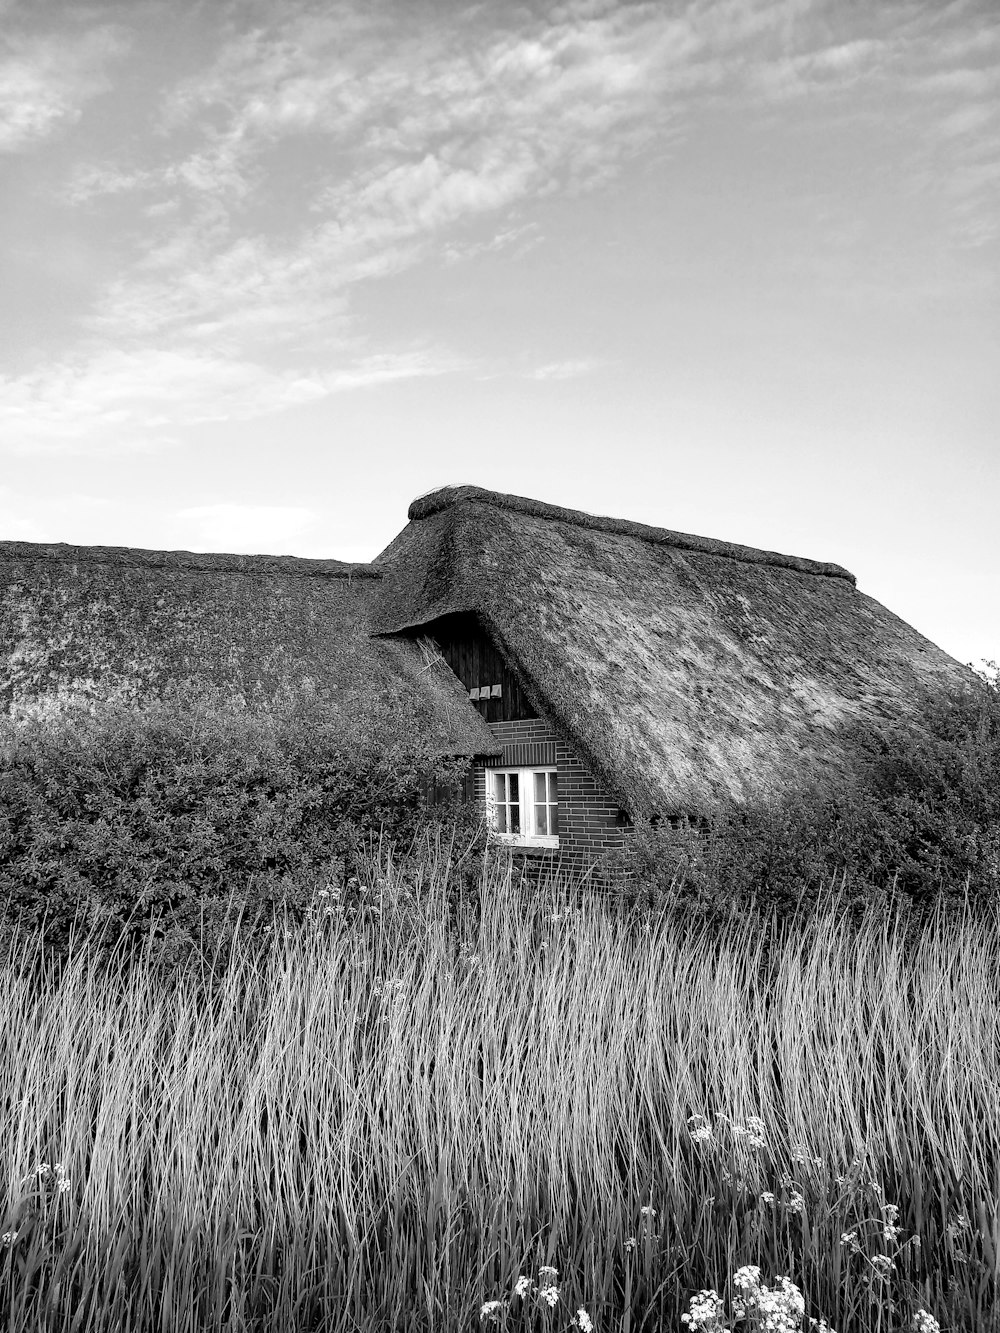 a black and white photo of a thatched roof house